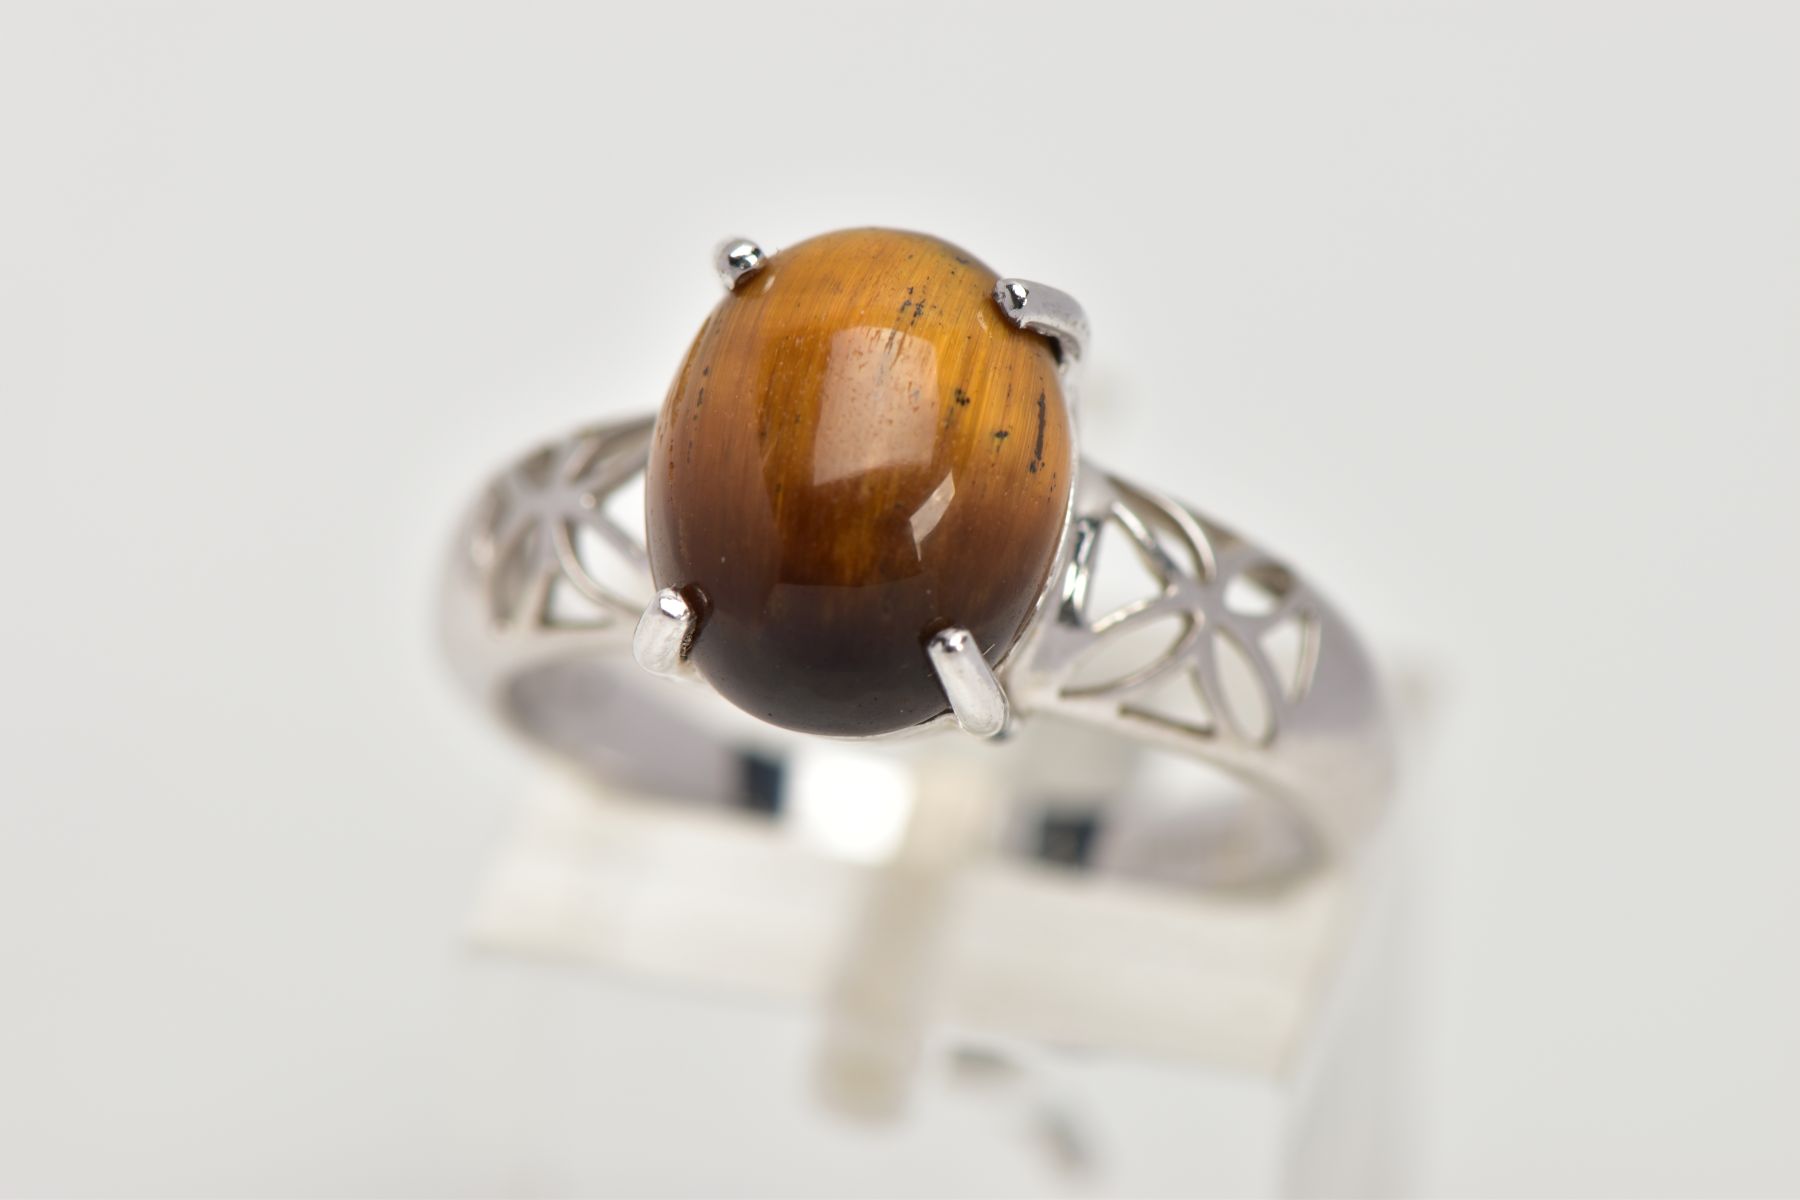 A 9CT WHITE GOLD, TIGER EYE SET RING, designed with an oval tiger eye cabochon, measuring